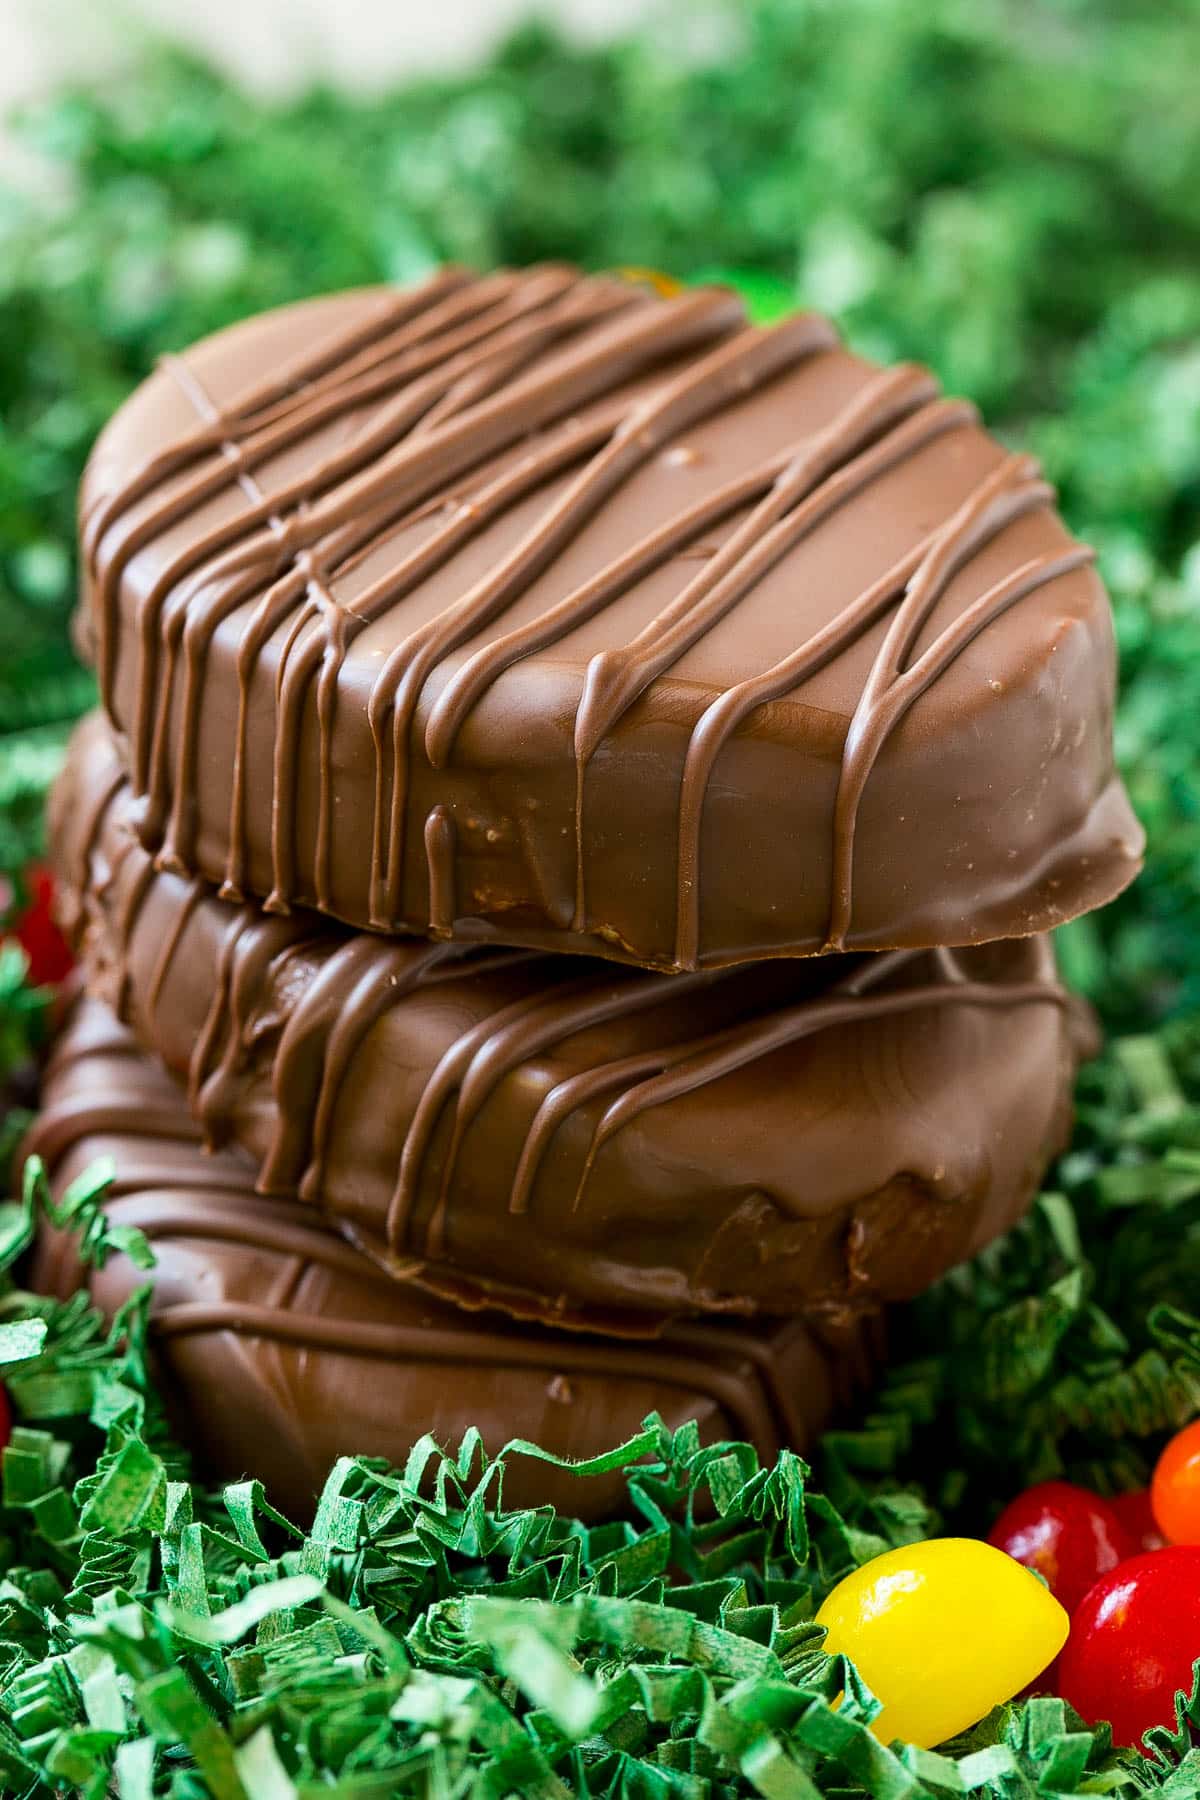 A stack of chocolate covered Reese's eggs.